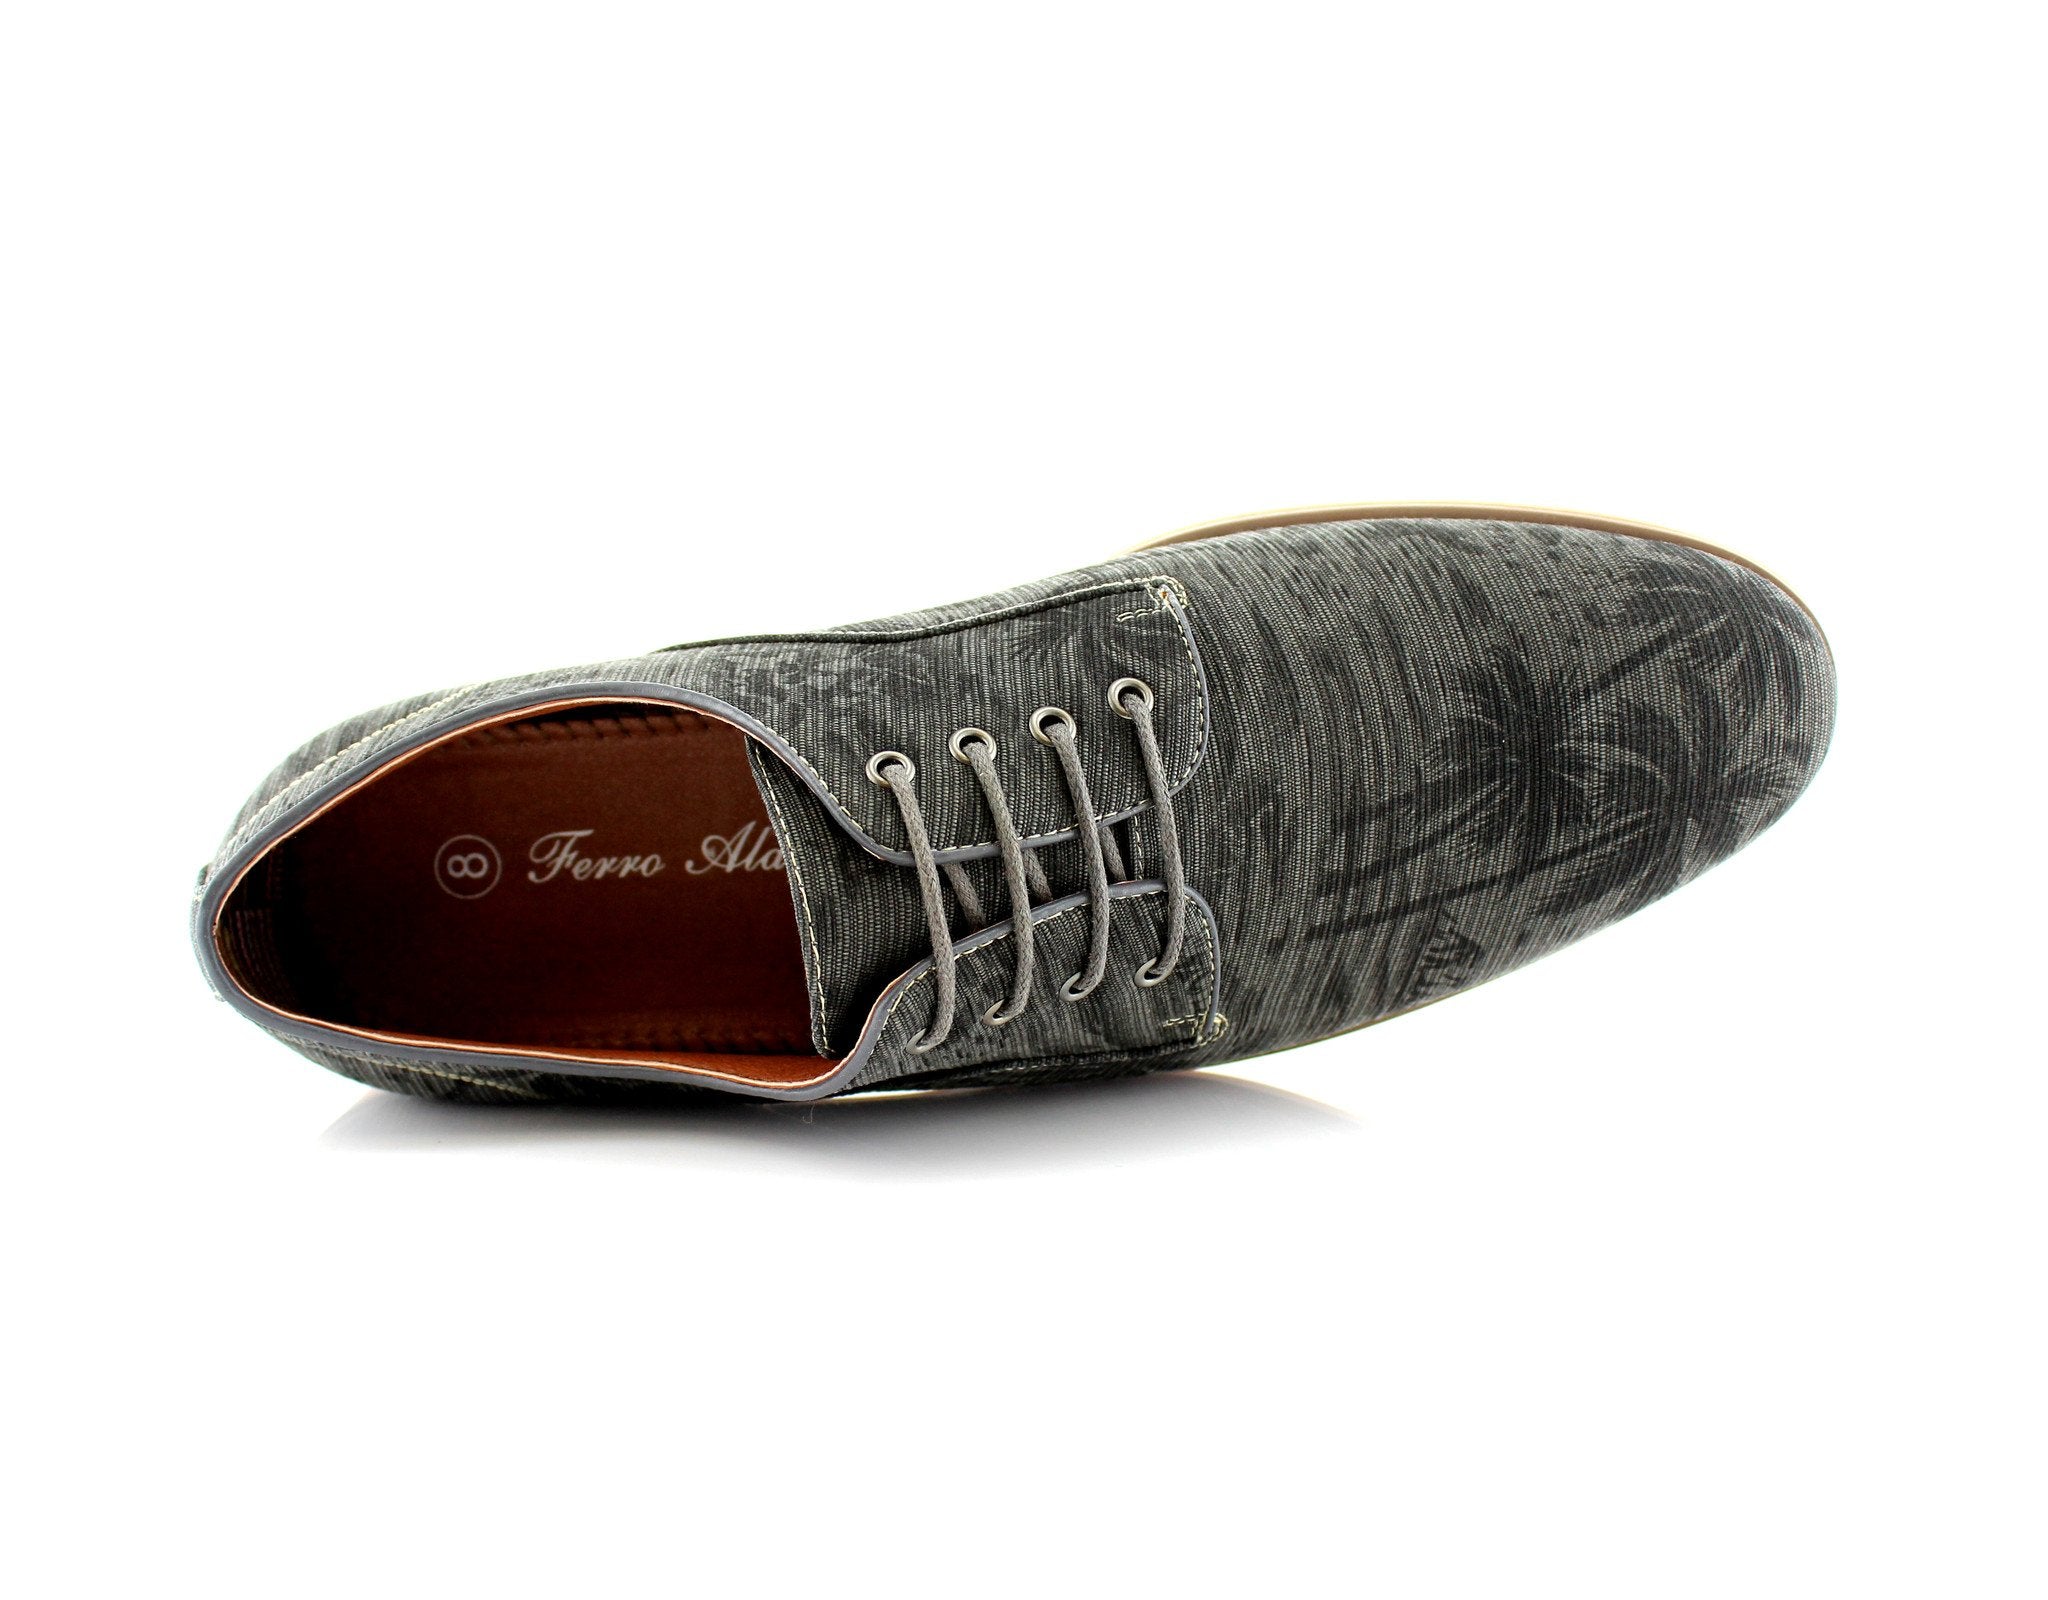 Palm Tree Print Derby Shoes | Paco by Ferro Aldo | Conal Footwear | Top-Down Angle View